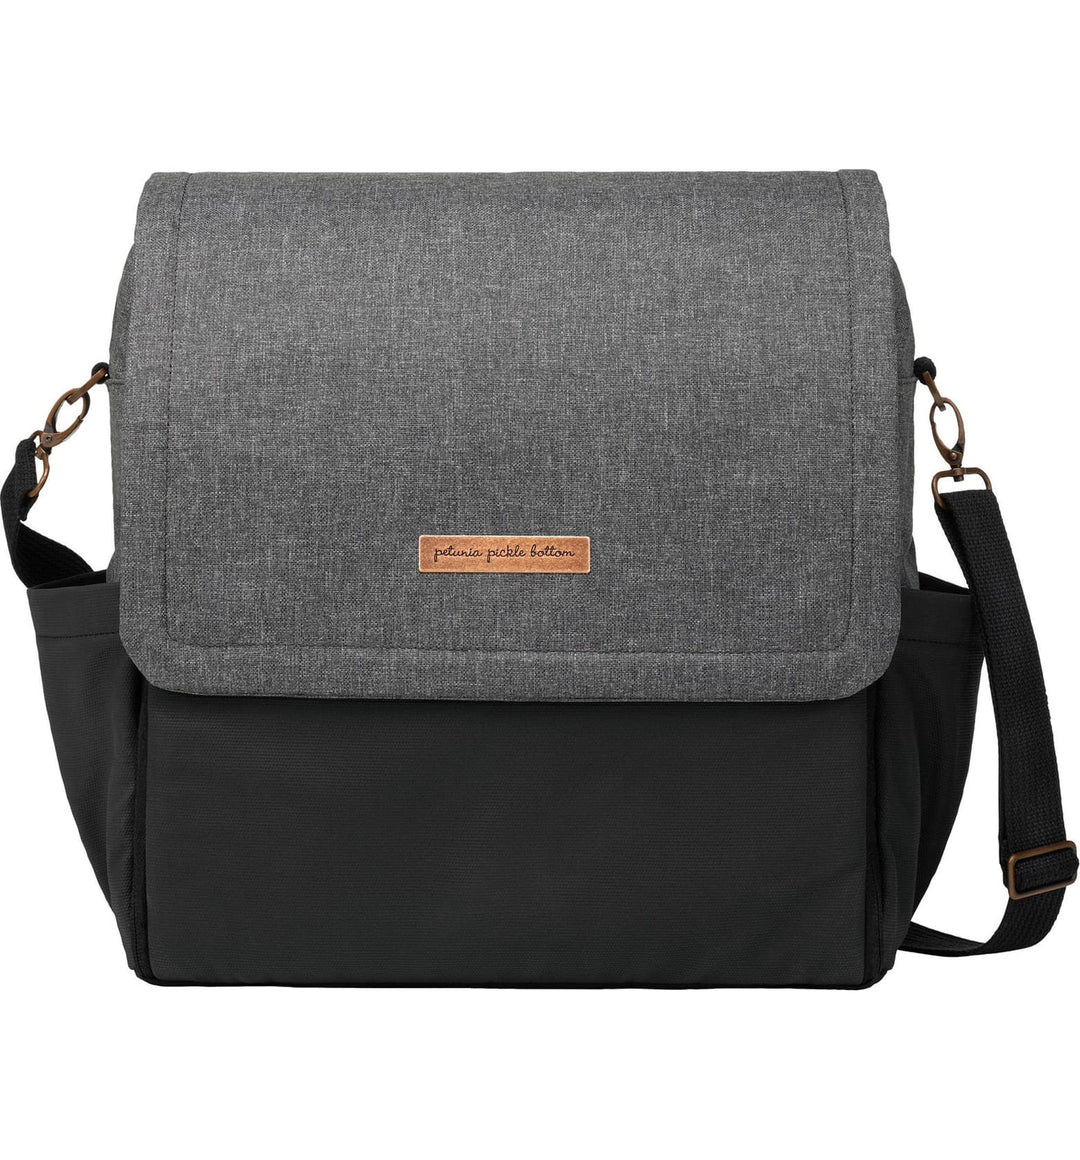 Petunia Pickle Bottom Boxy Backpack in Black Matte Leatherette